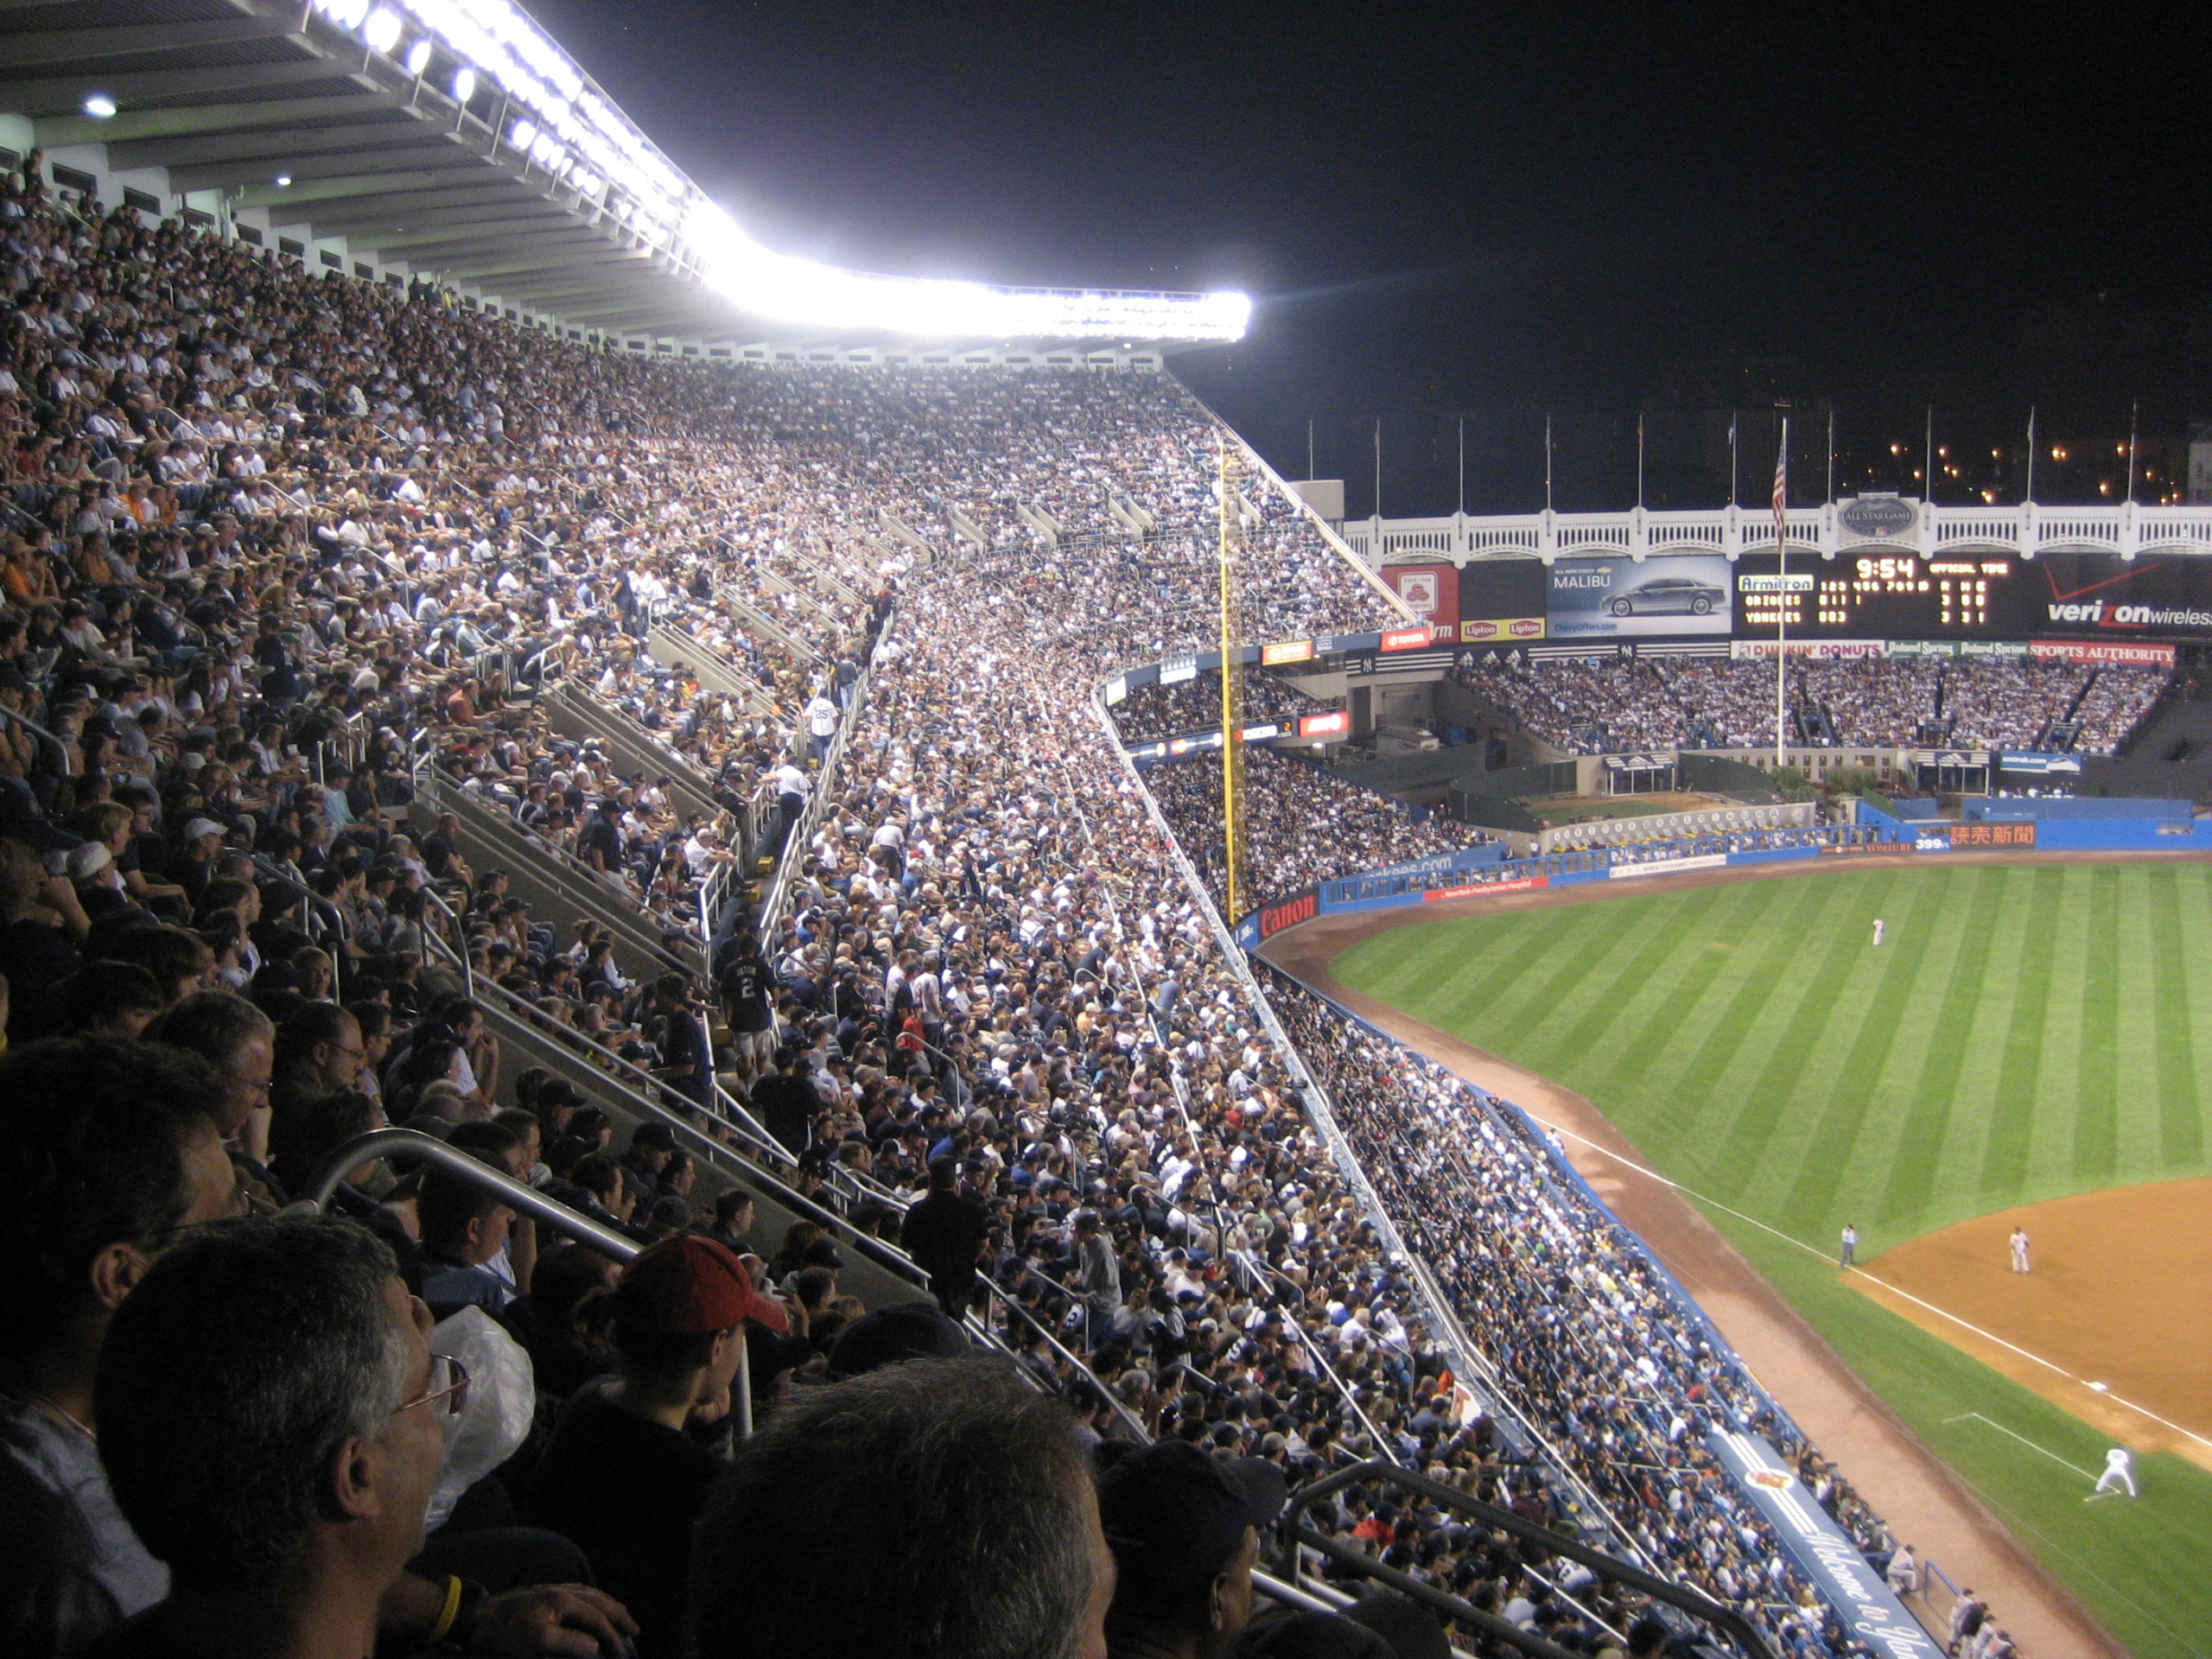 September 21, 2008: The final game at Yankee Stadium – Society for